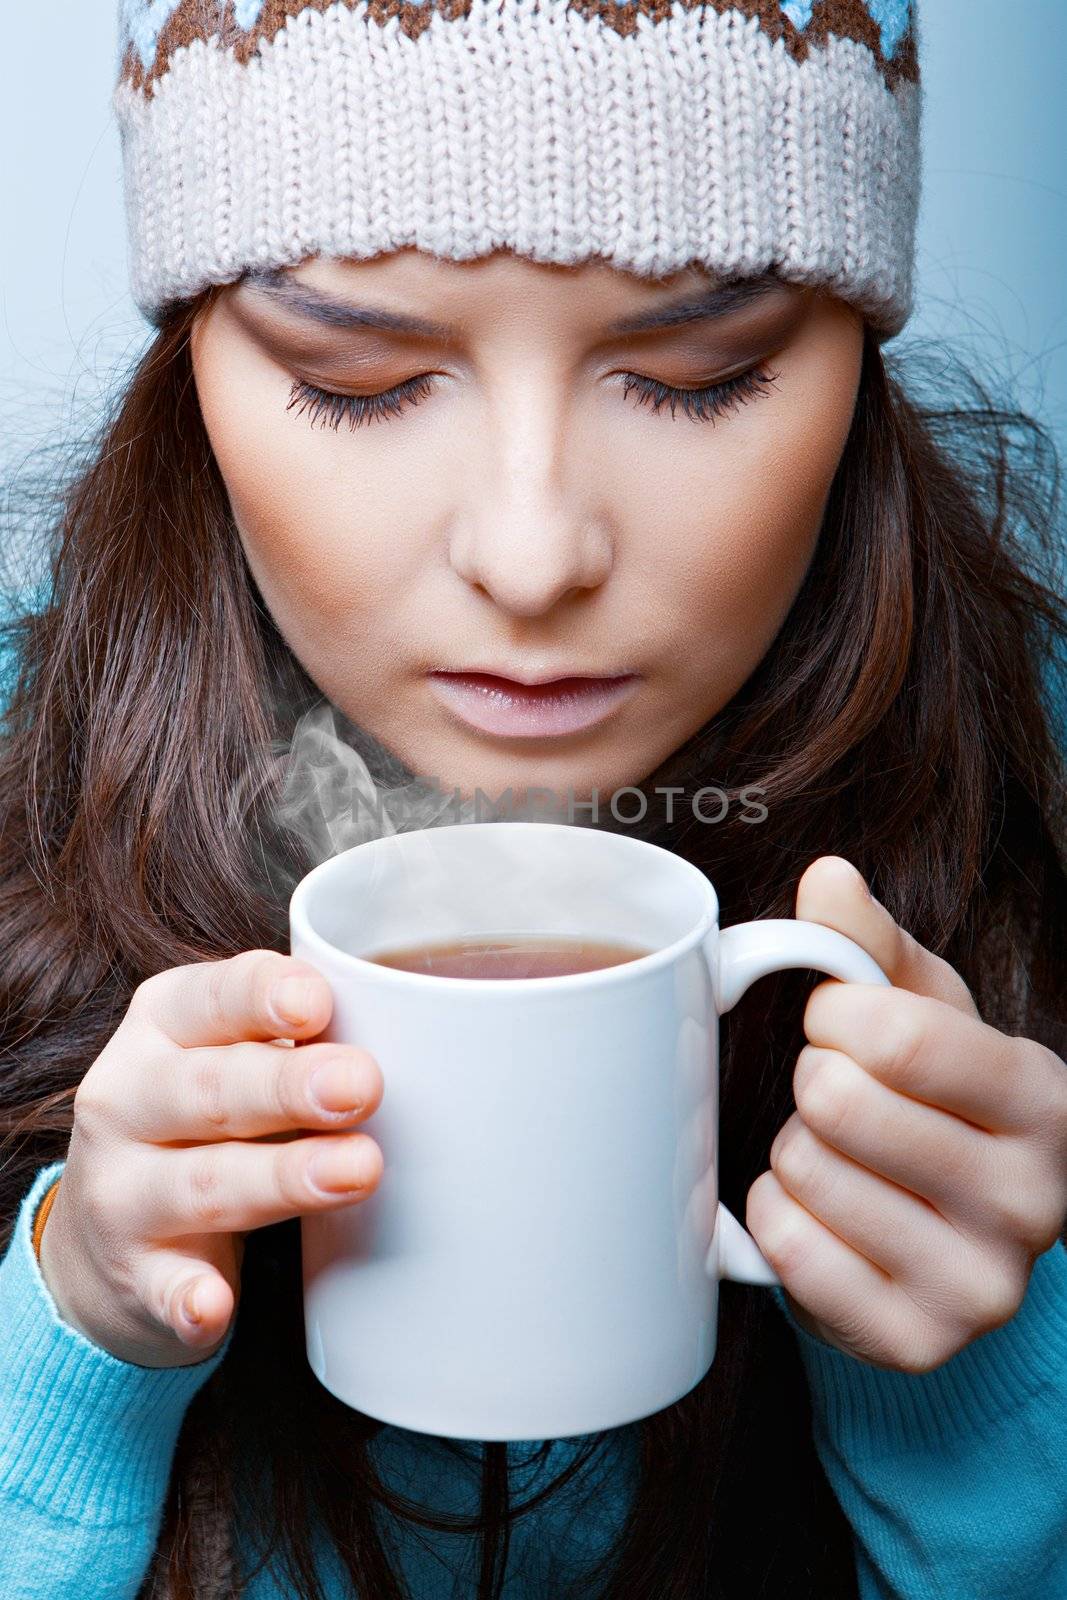 woman in a hat with hot tea closeup on a blue background